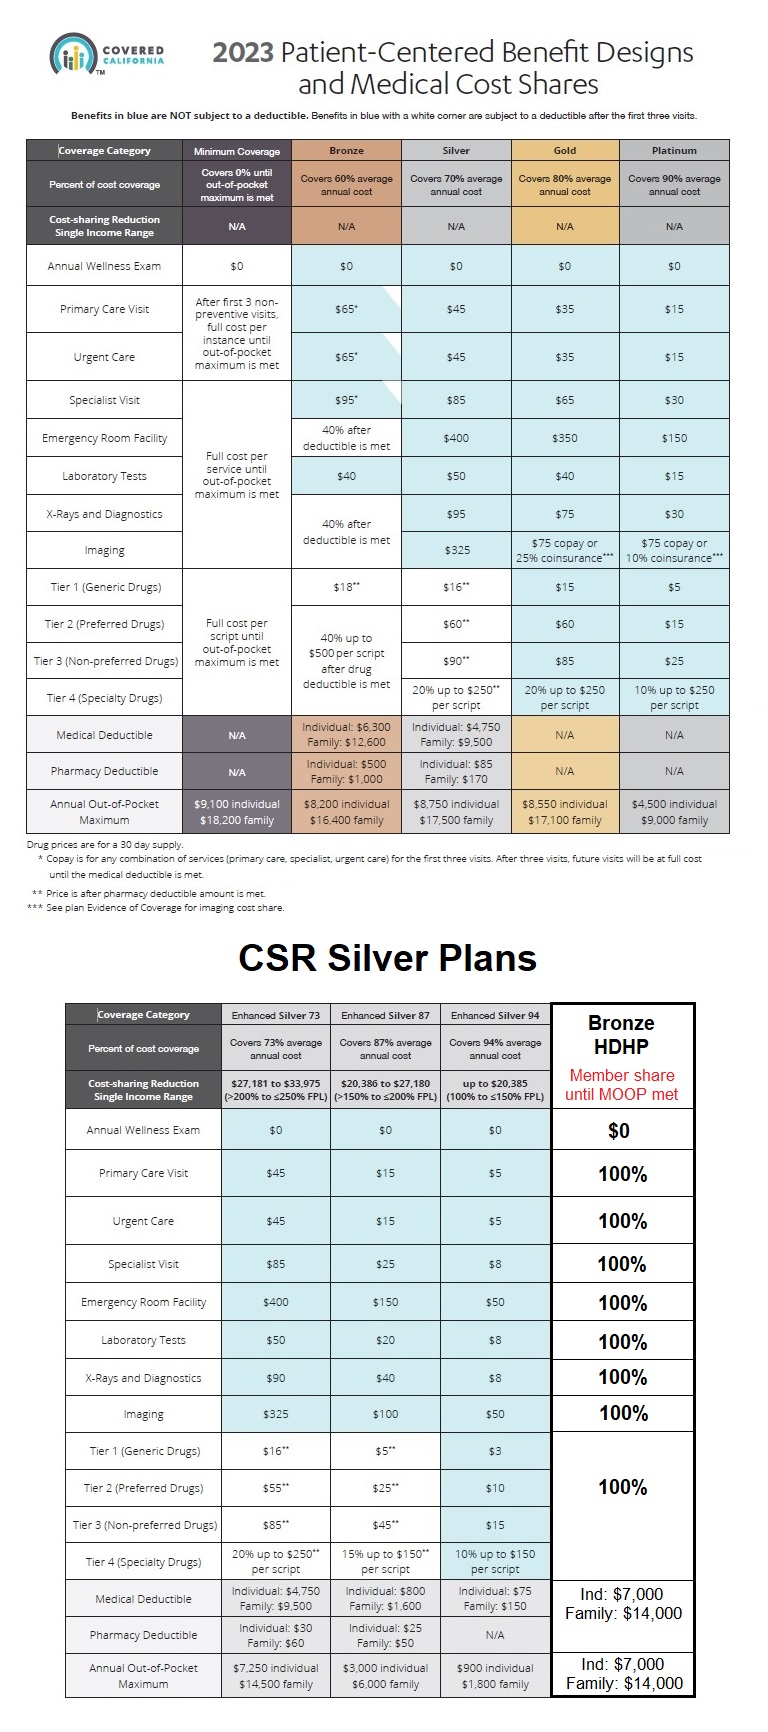 2023 Covered California standard benefit design health plans including enhanced Silver plans and HDHP Bronze plan summaries.